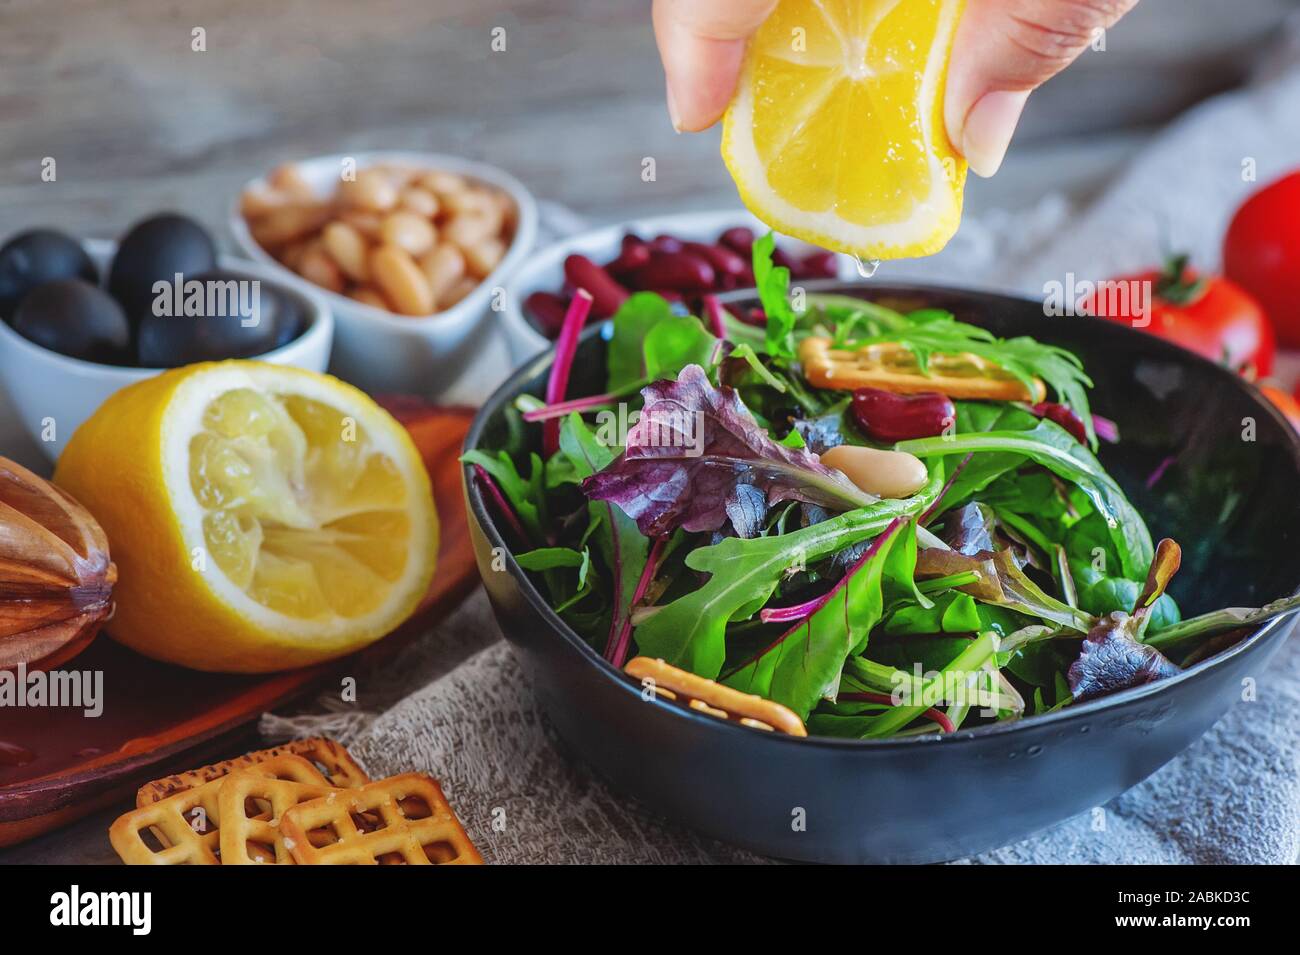 Delicious and healthy salad with beans, arugula, tomatoes and lemon juice. Healthy fitness food for dieters and vegans. Stock Photo